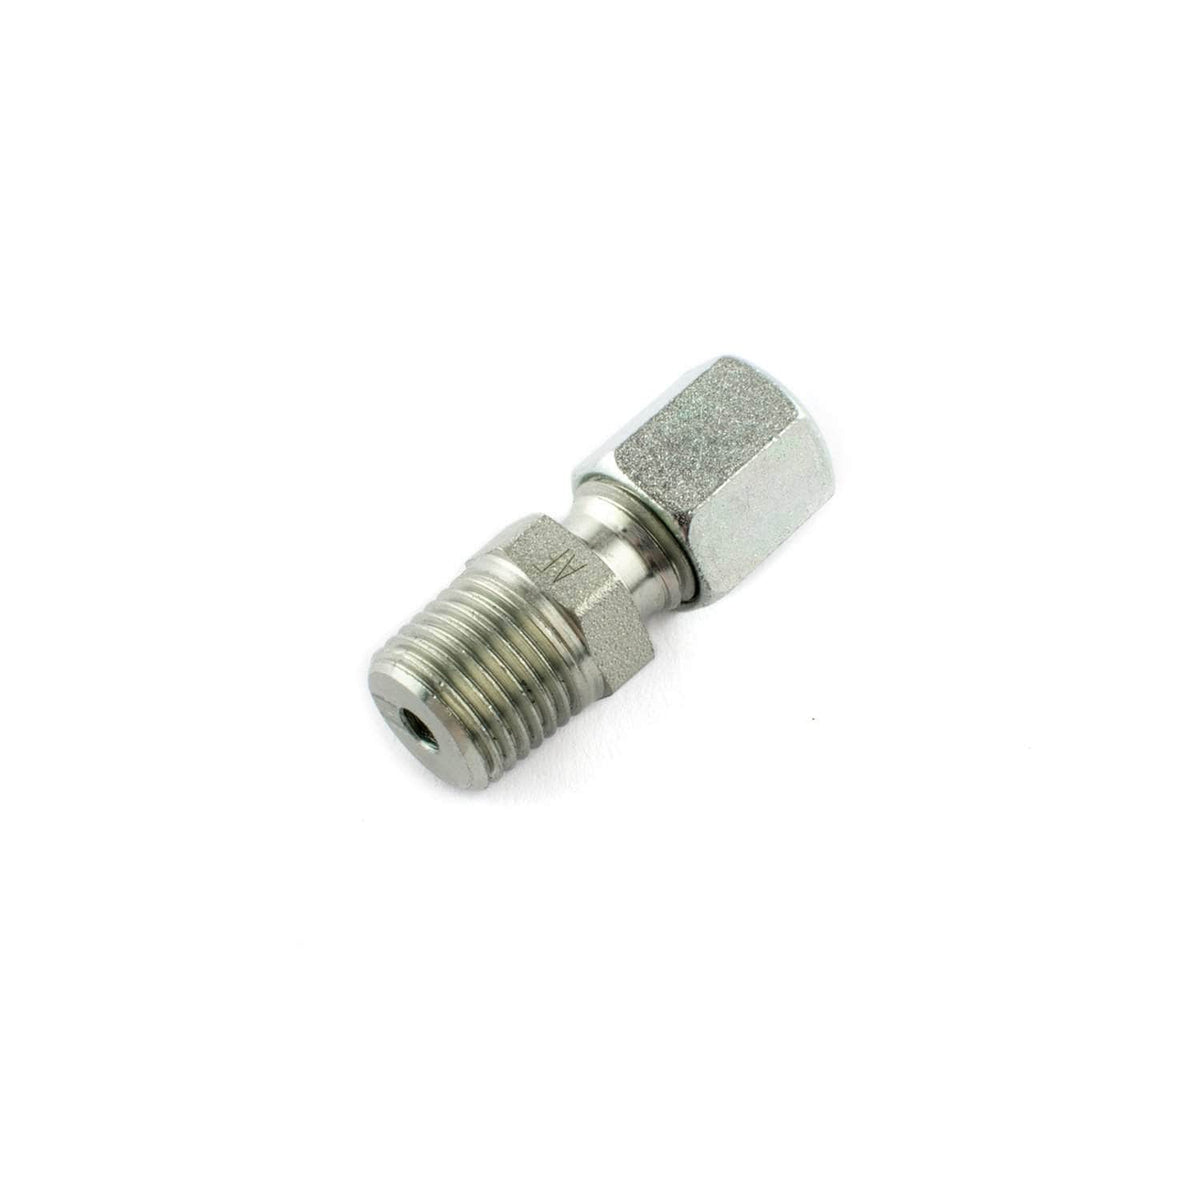 1/4&quot; x 6mm inline compression fitting for use with oil Aga range cookers with Deep Well burners